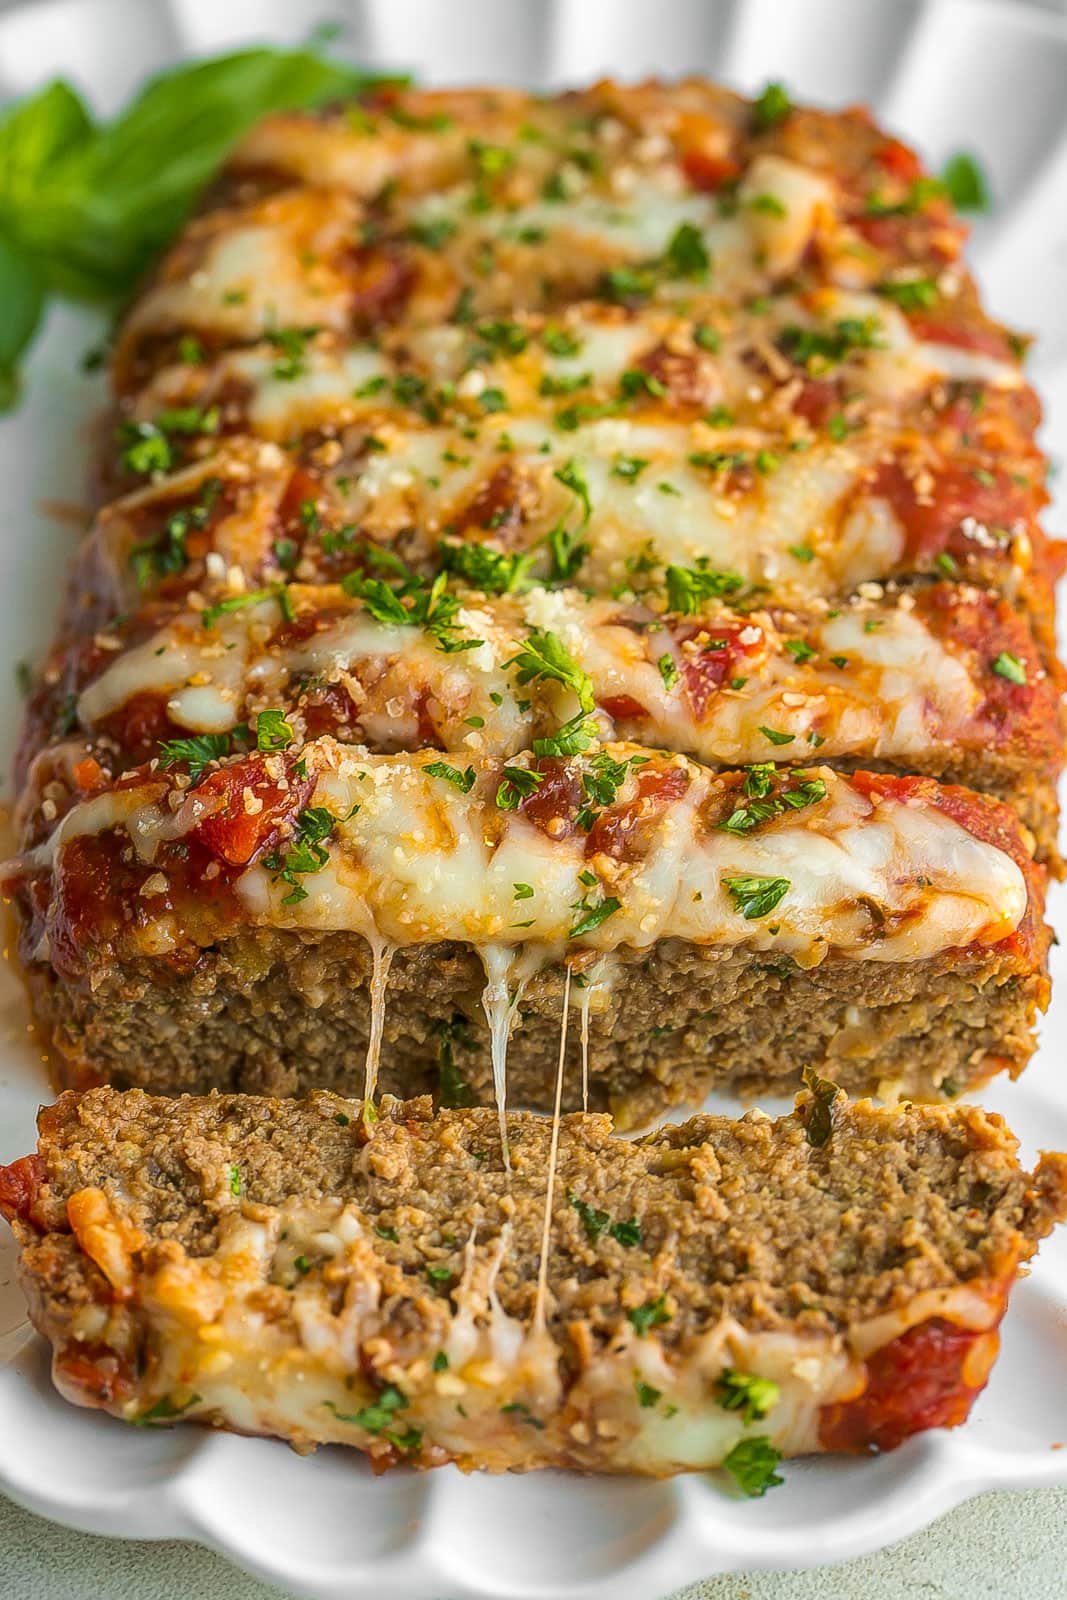 Cheesy meatloaf closeup view.